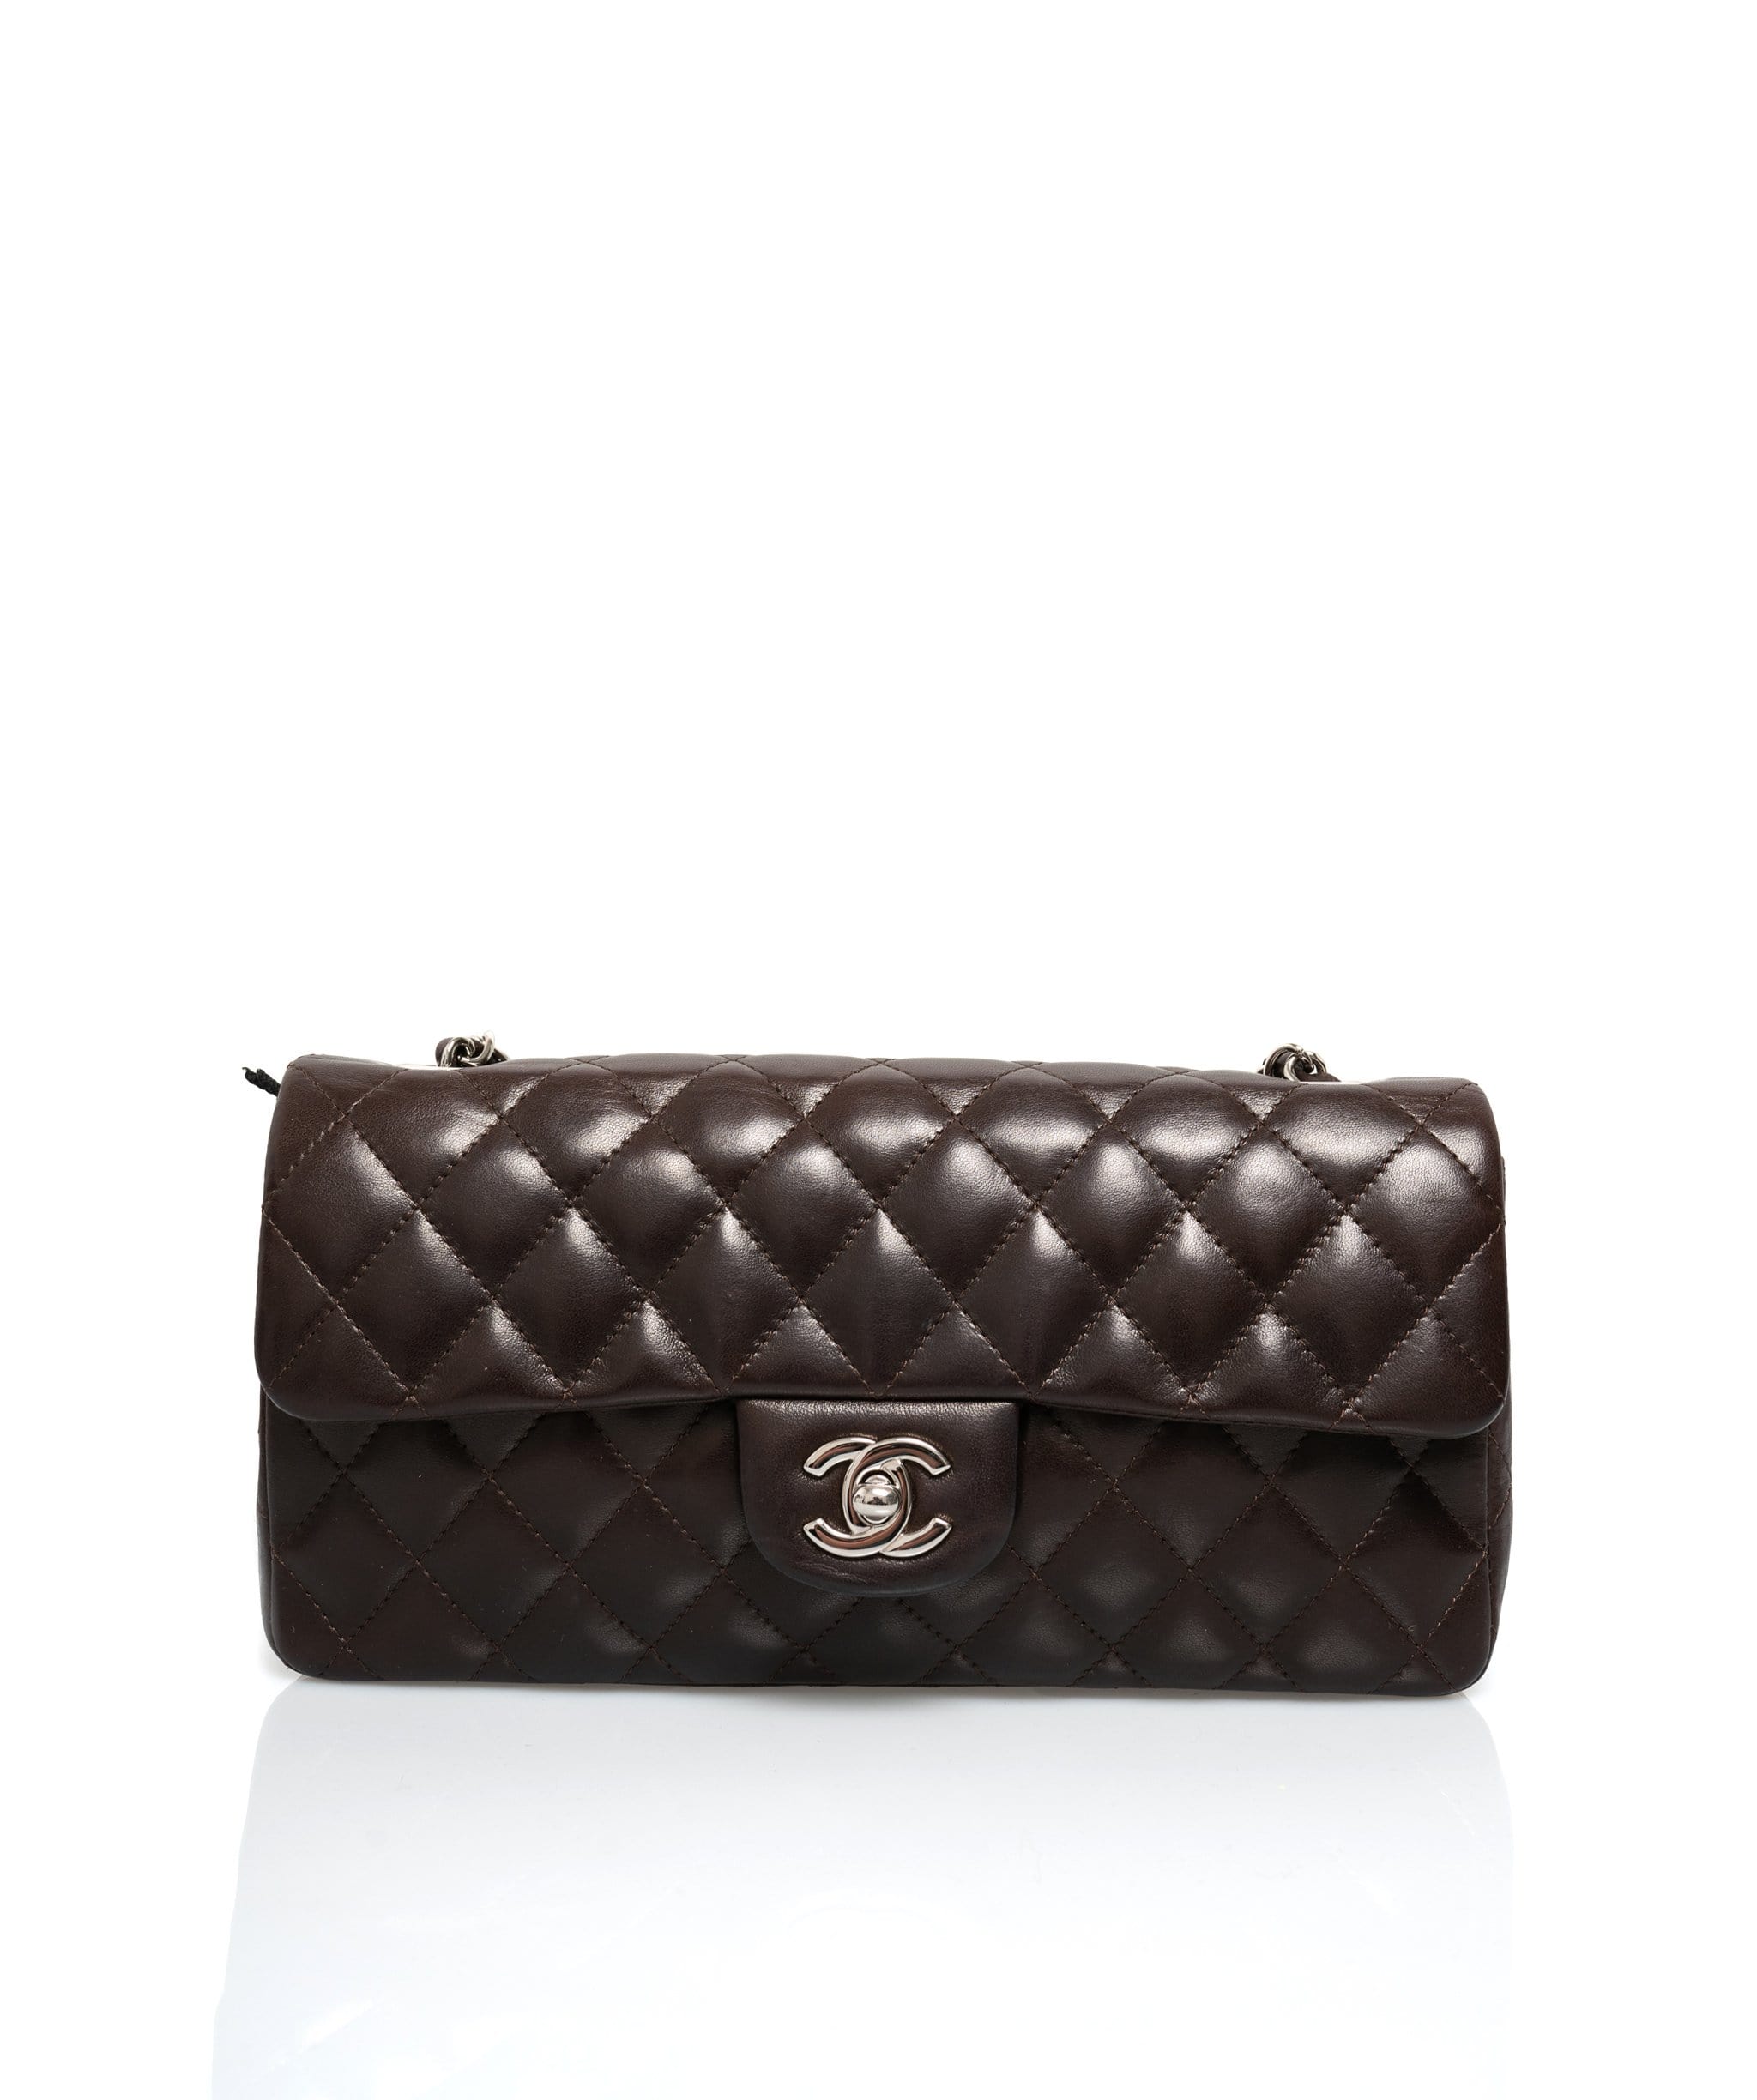 Chanel Brown Lambskin East West Bag with Silver Hardware - AWC1039